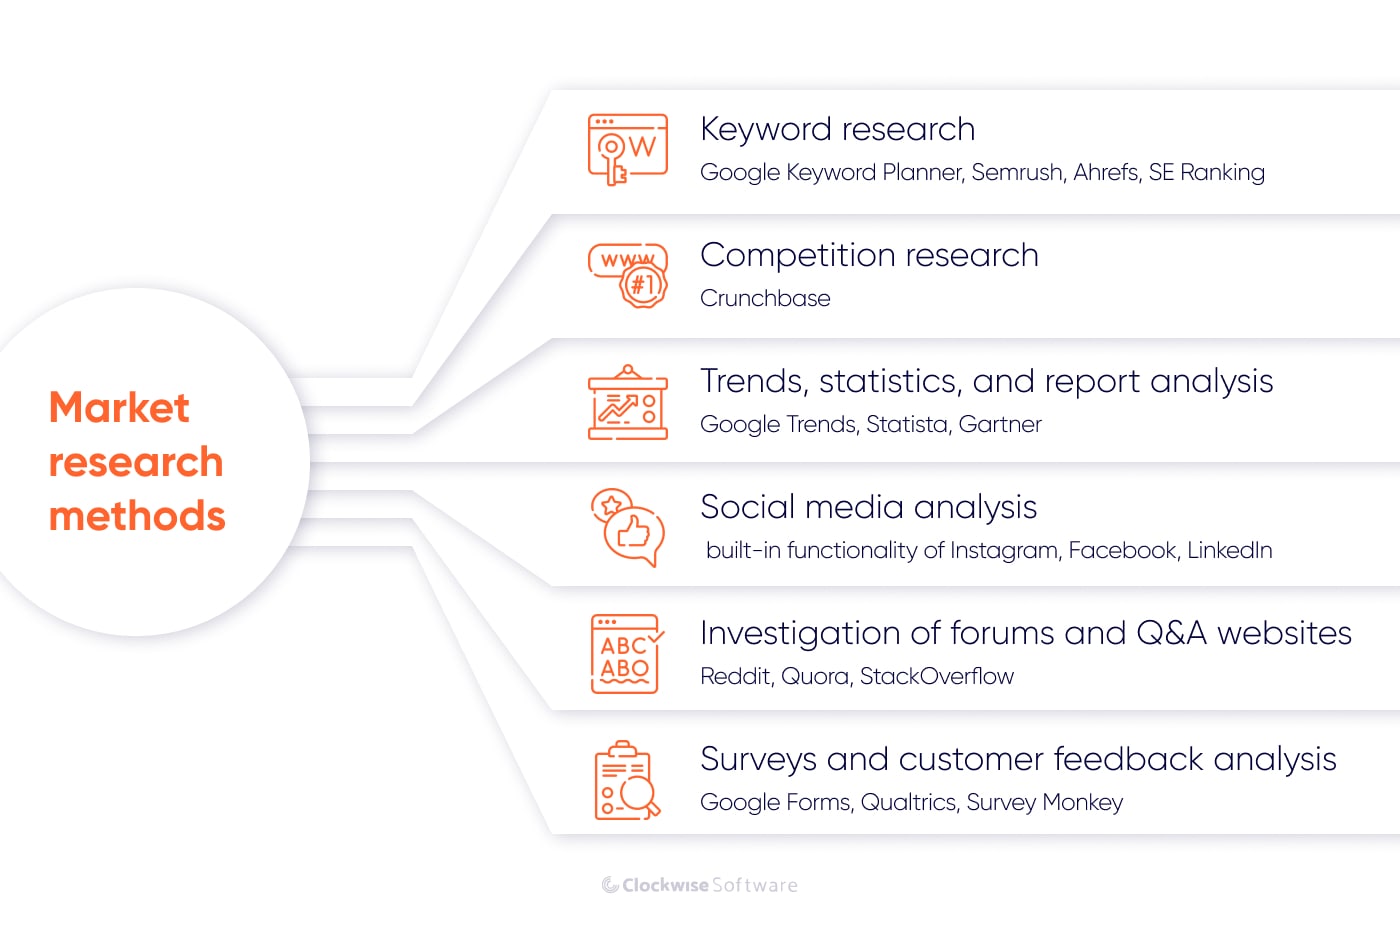 market research tools for startups